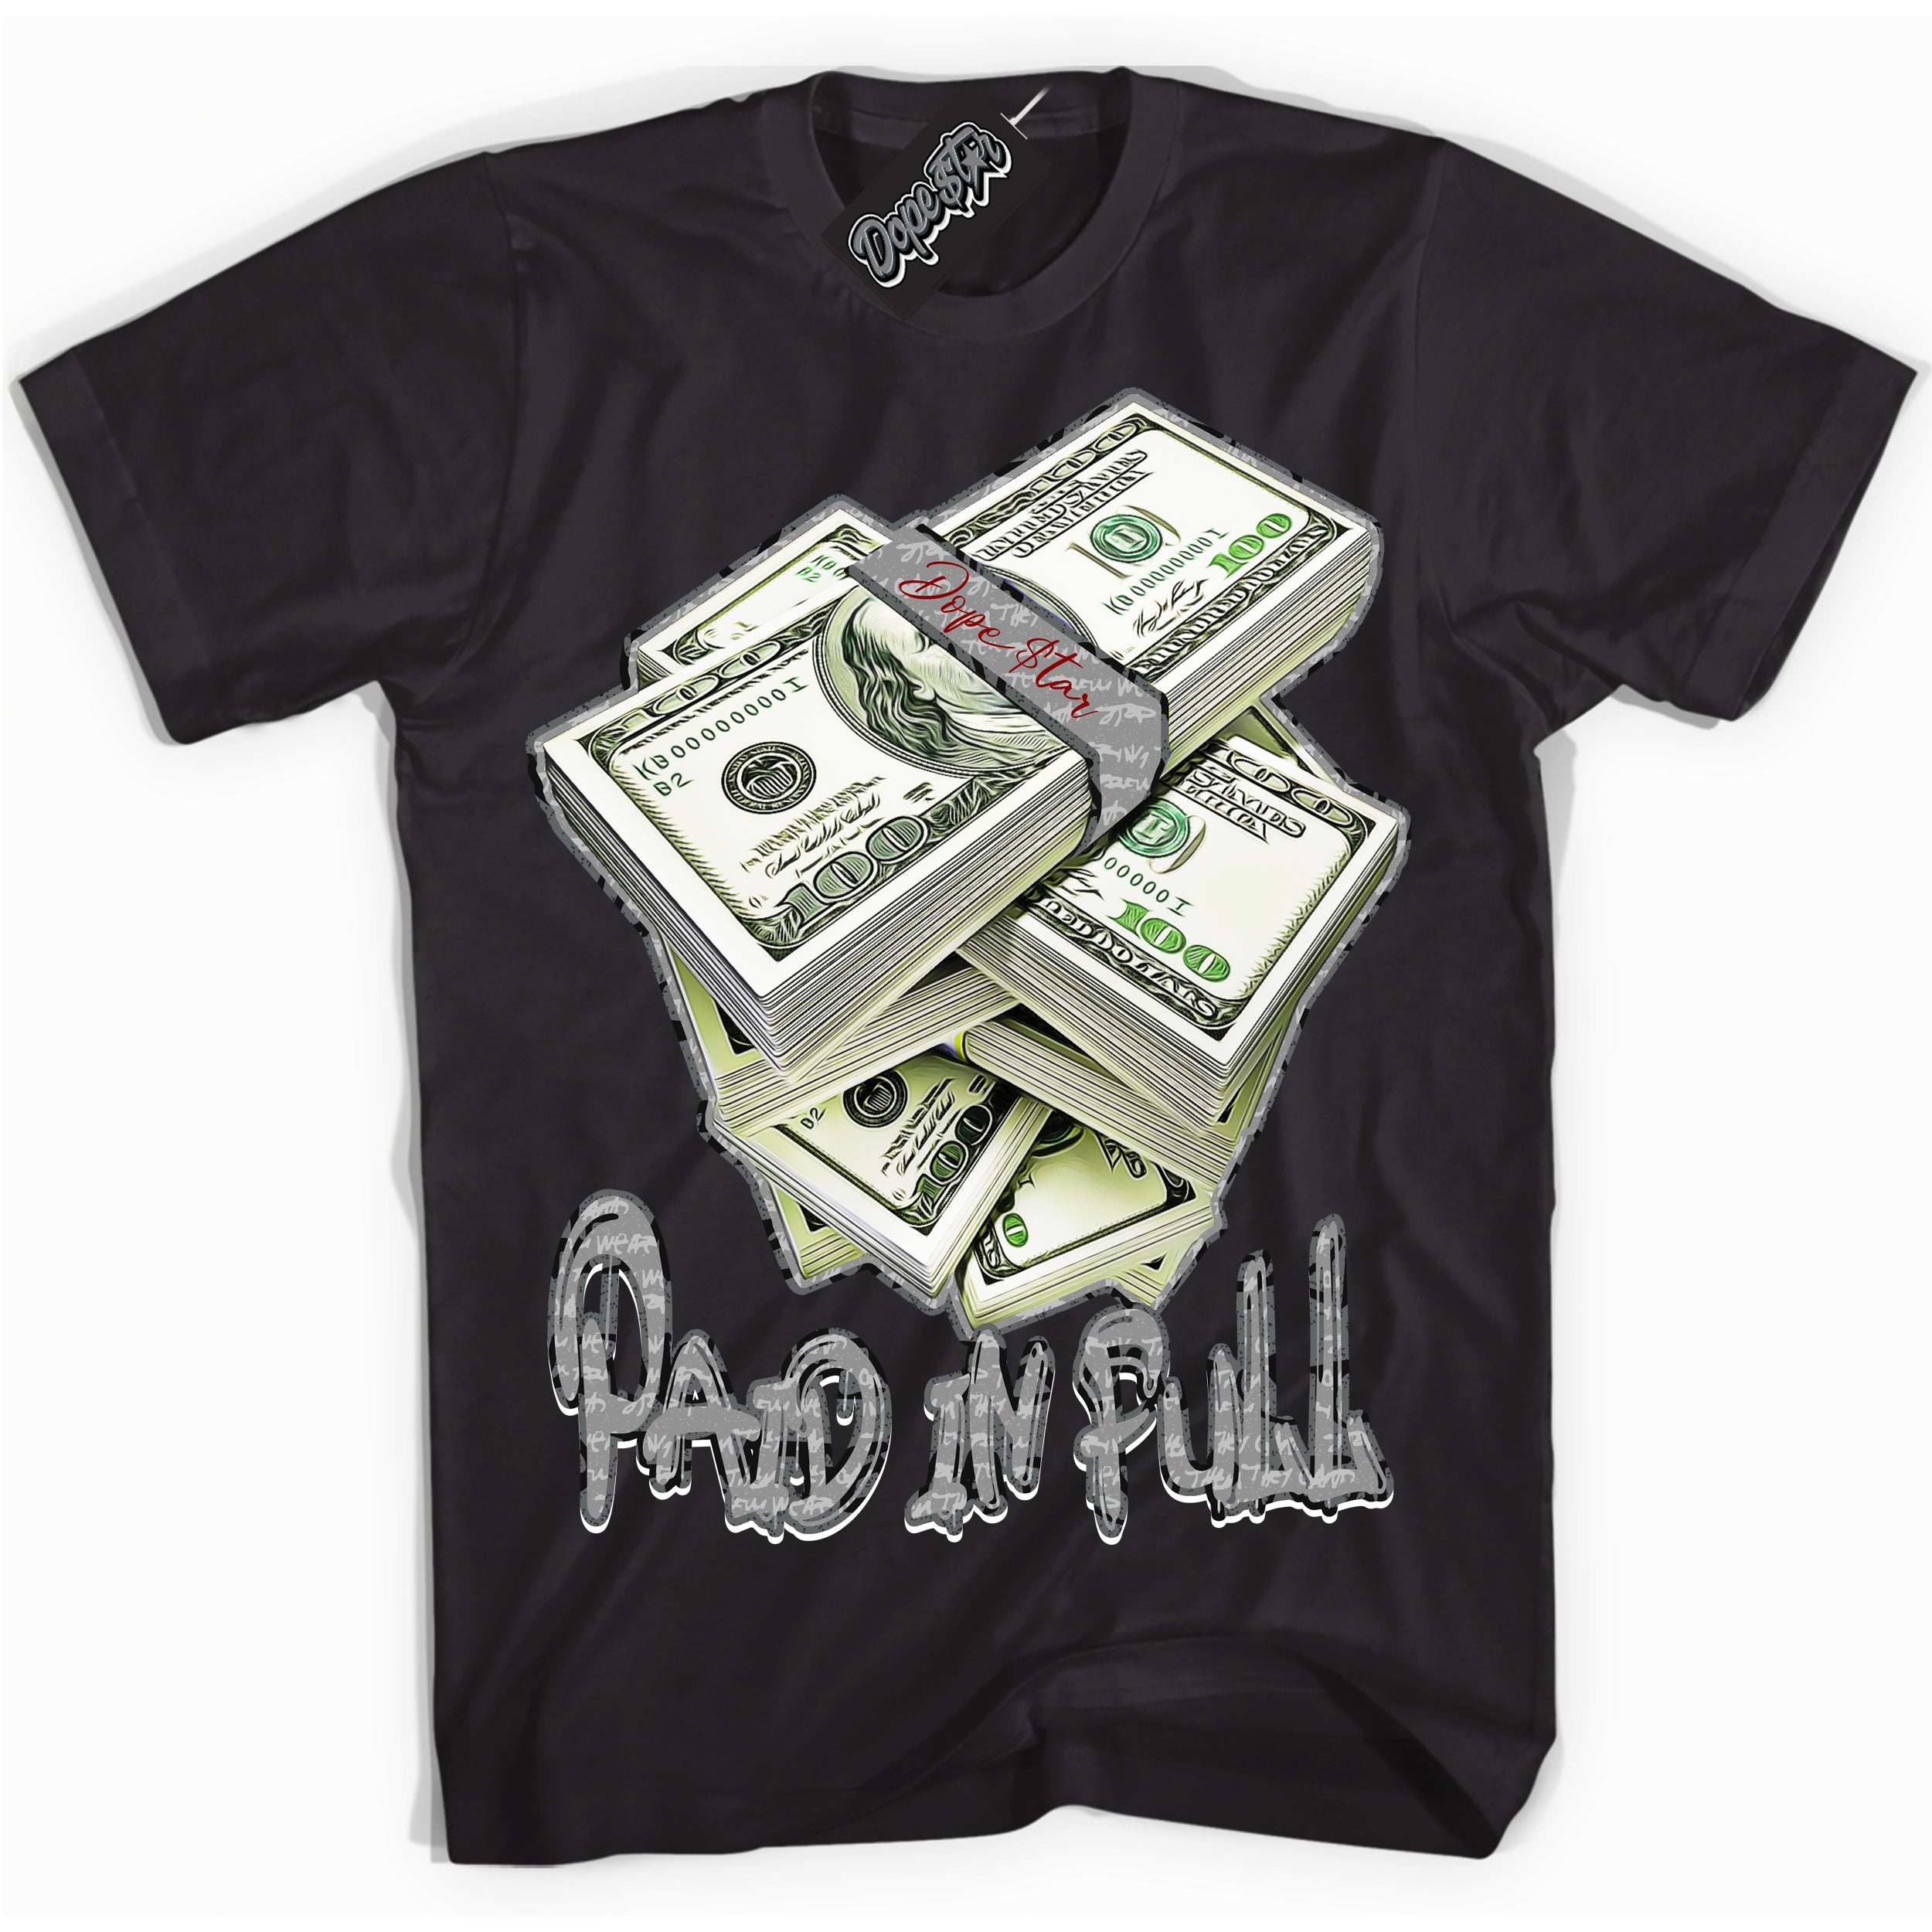 Cool Black Shirt with “ Paid In Full ” design that perfectly matches Rebellionaire 1s Sneakers.